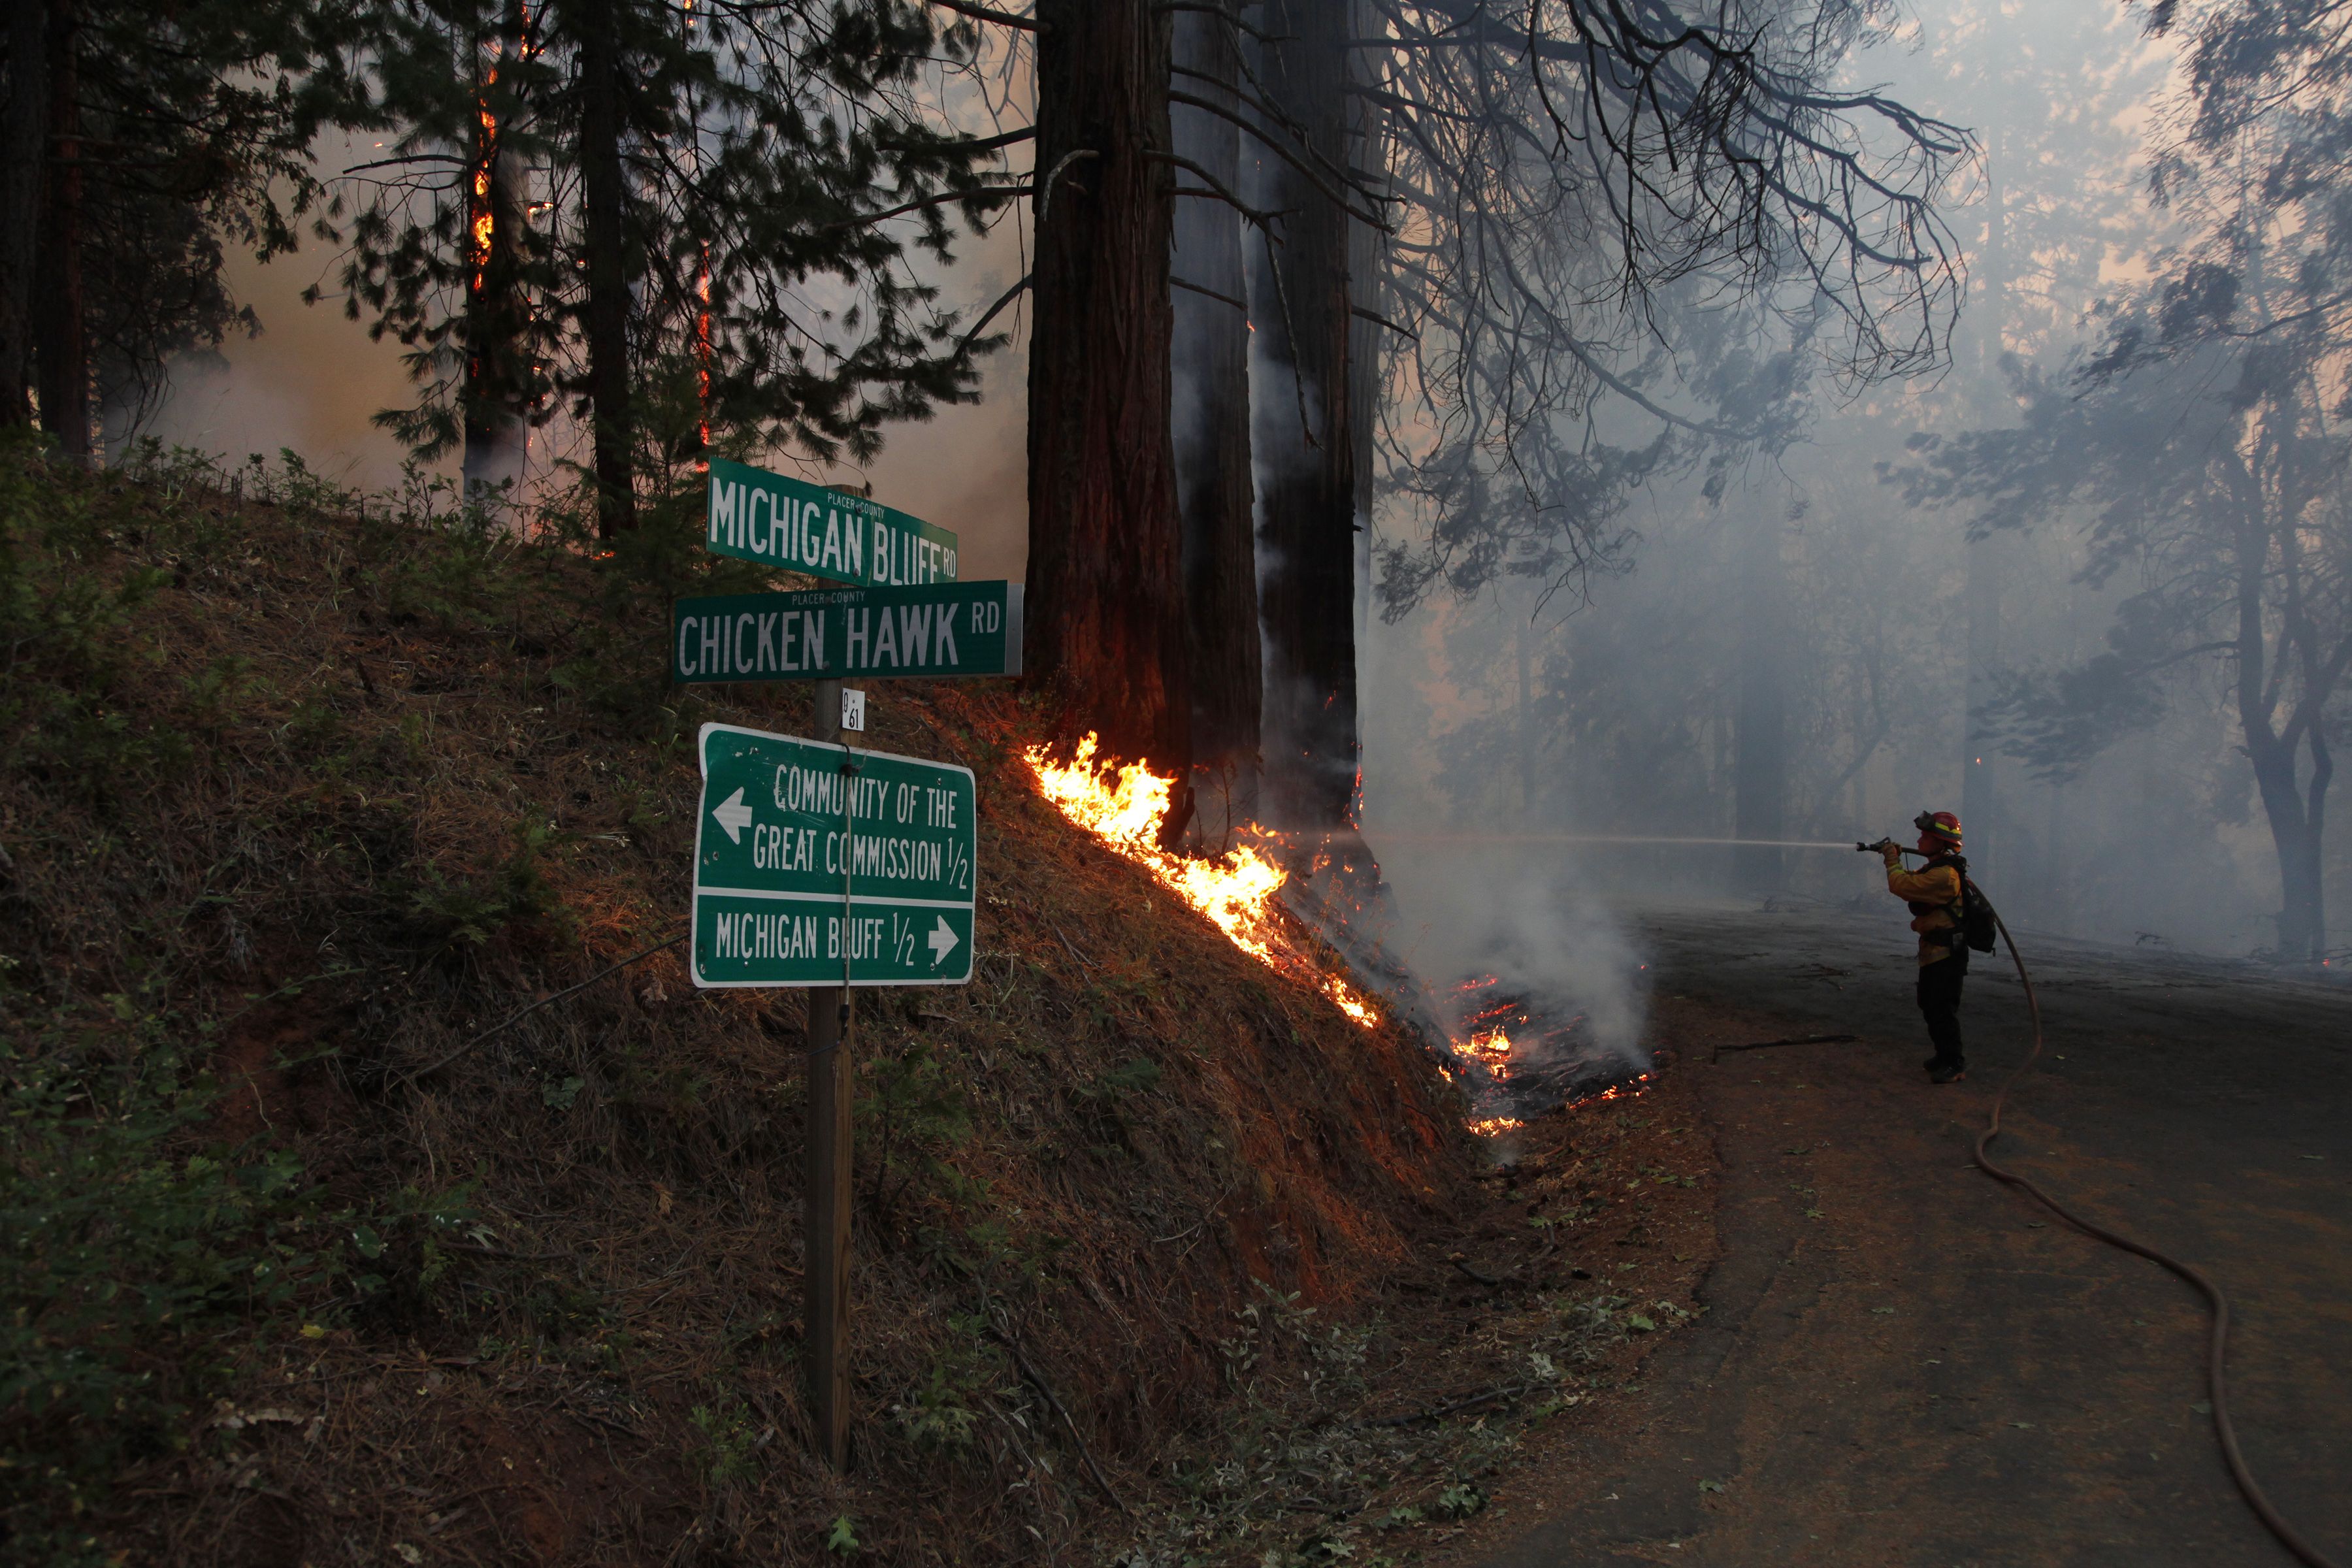 A firefighter spraying flames during the Mosquito Fire near Michigan Bluff, California Sept. 7